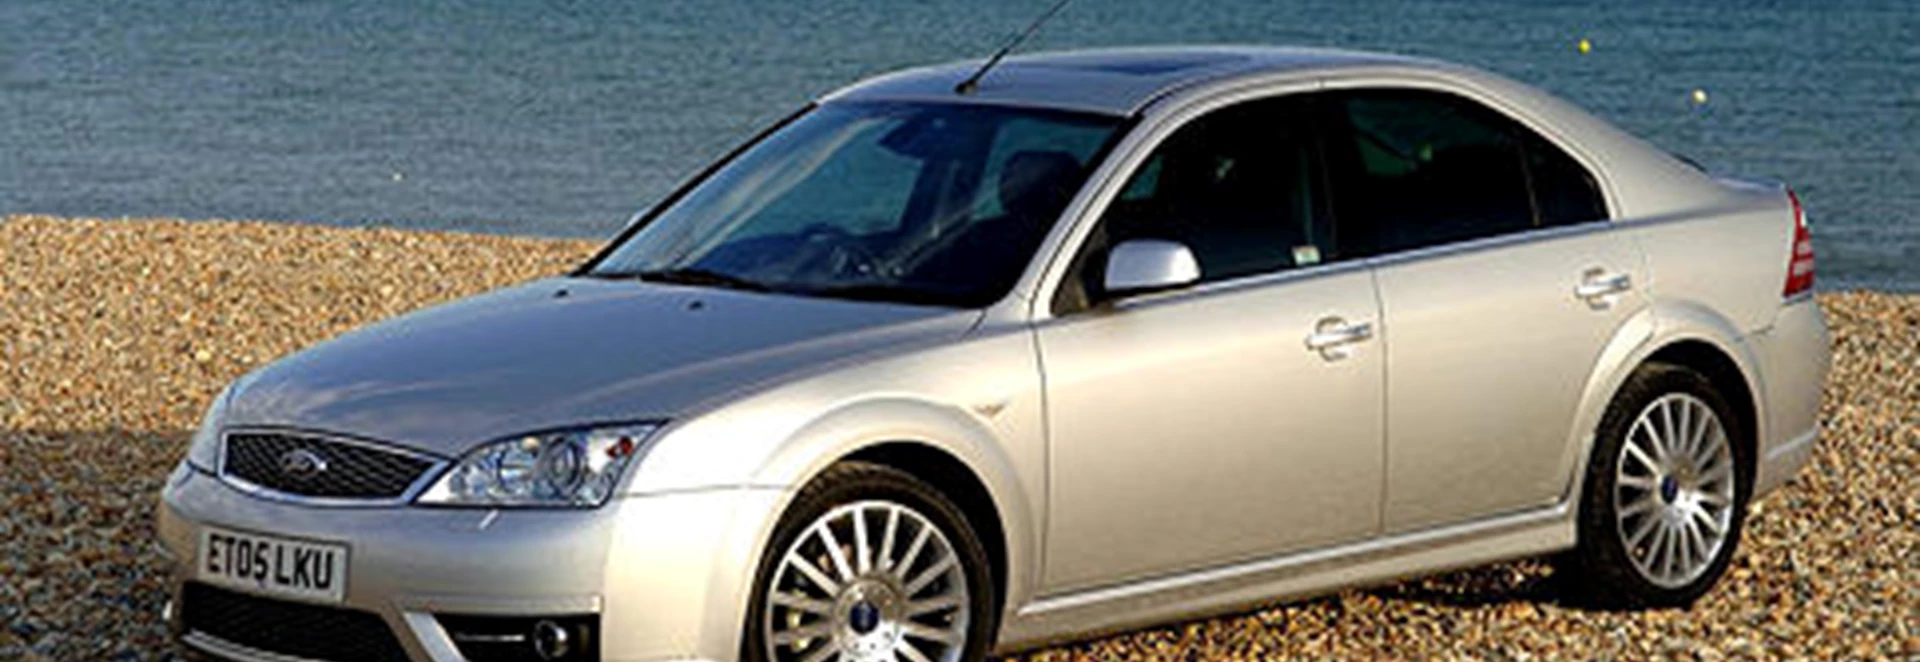 Ford Mondeo ST TDCi (long test) (2005) 